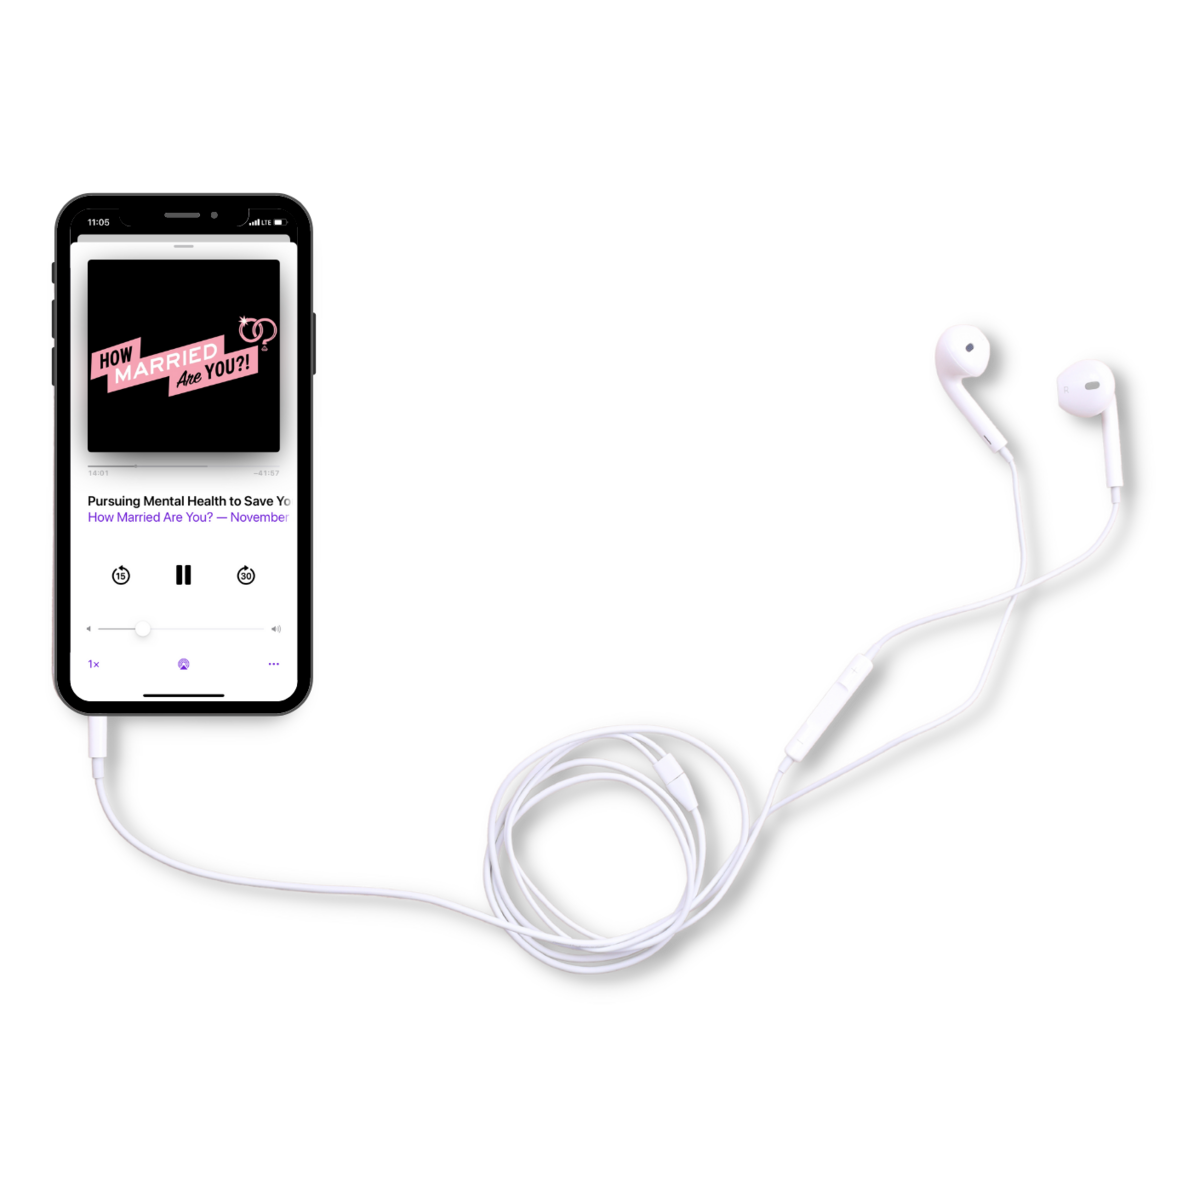 How married are you podcast episode about mental health playing on iPhone with headphones.